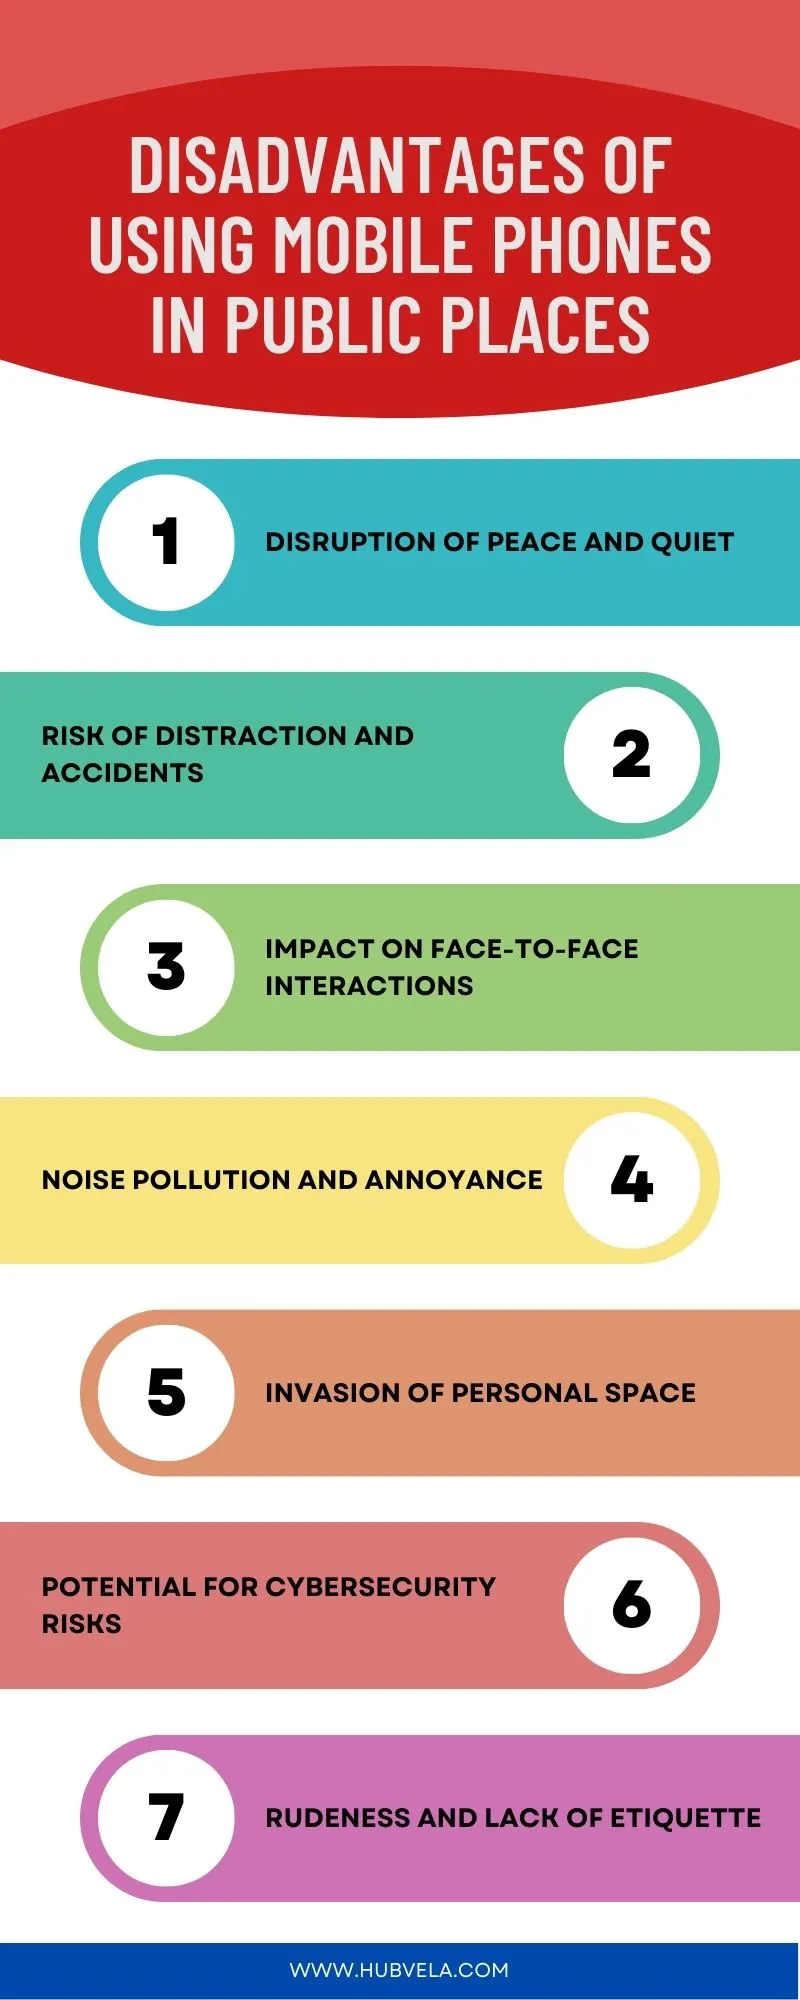 Disadvantages of Using Mobile Phones in Public Places Infographic